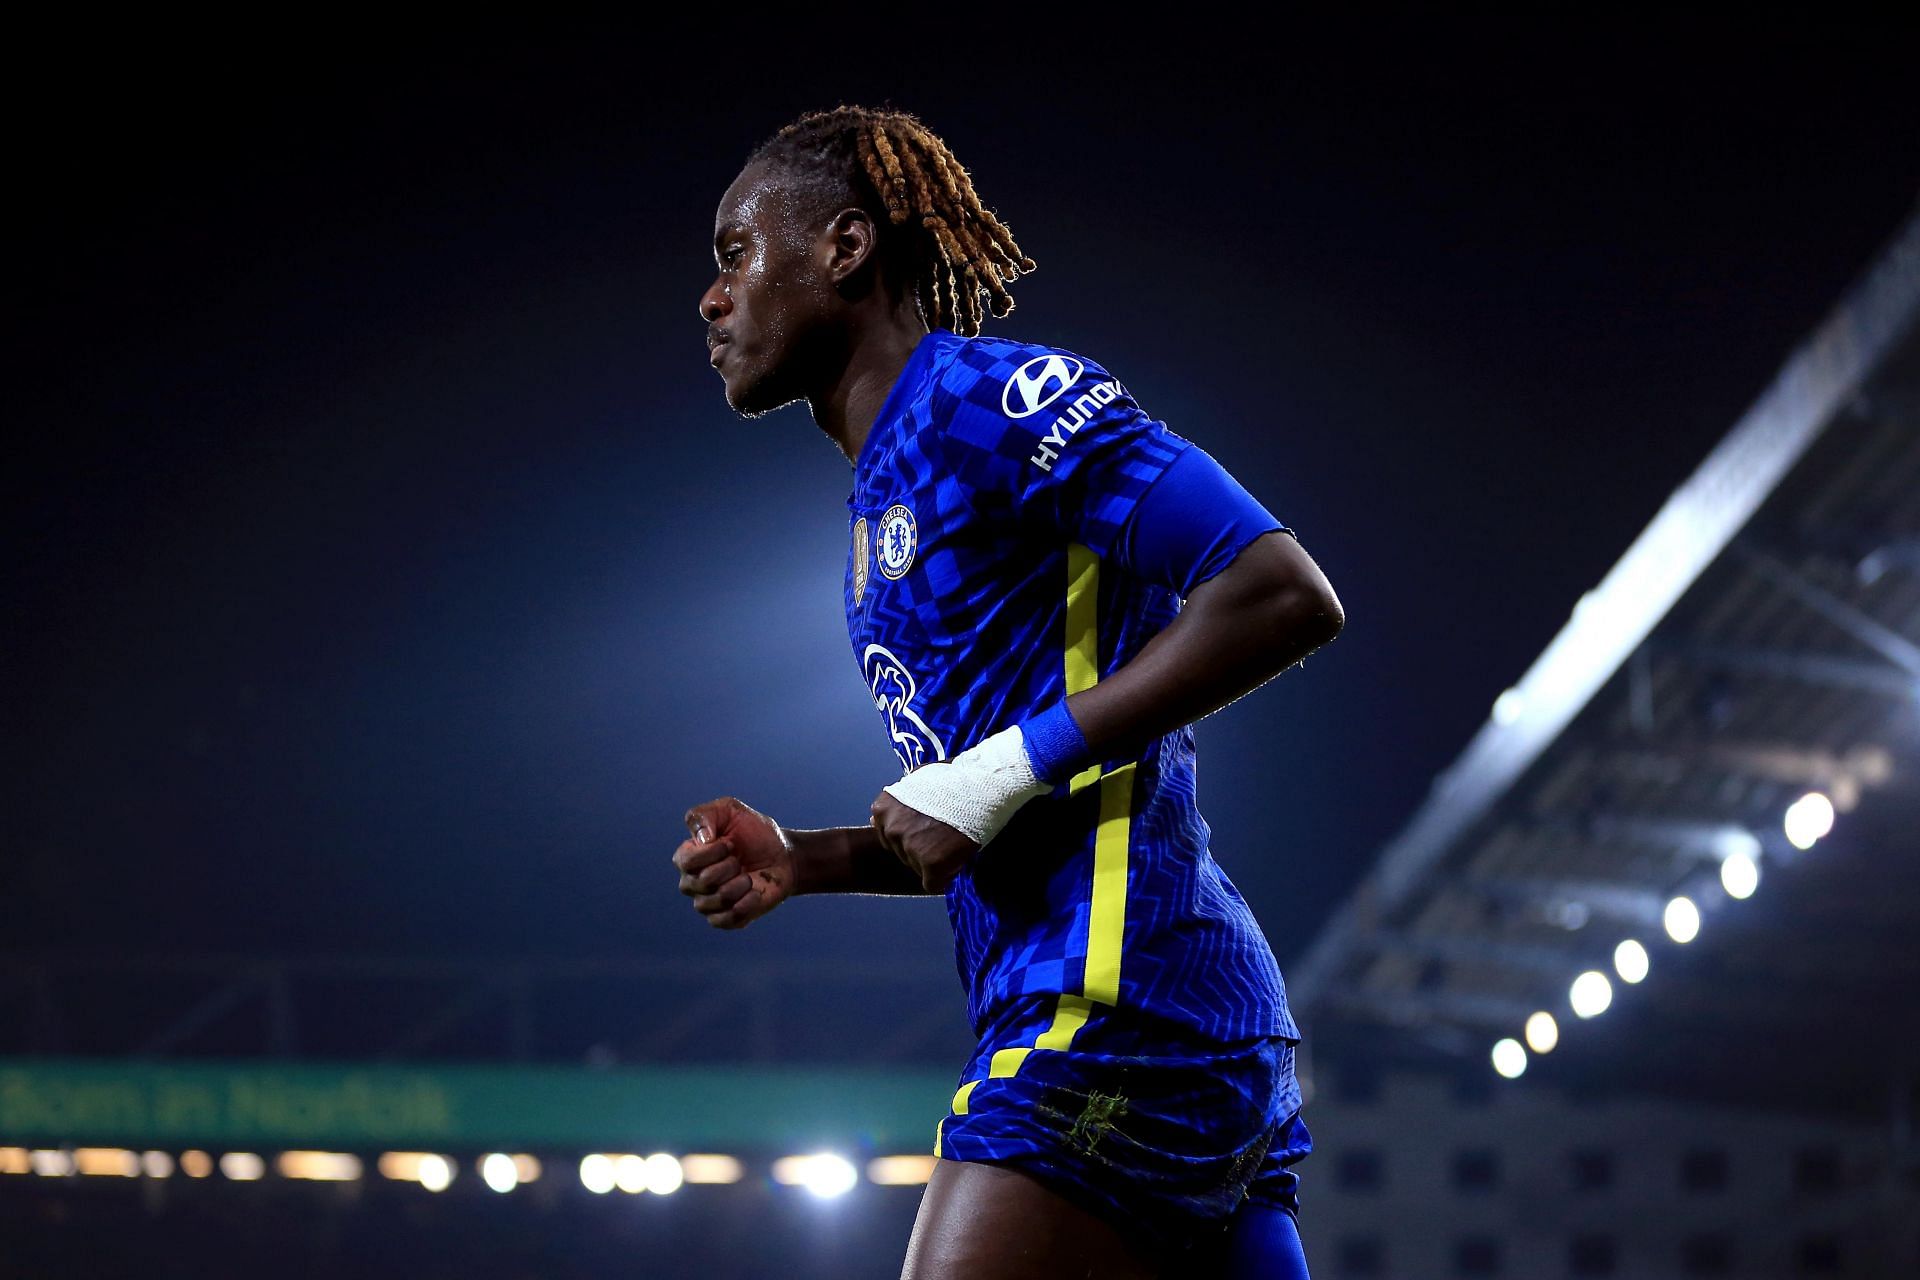 Trevoh Chalobah celebrates after scoring against Norwich City